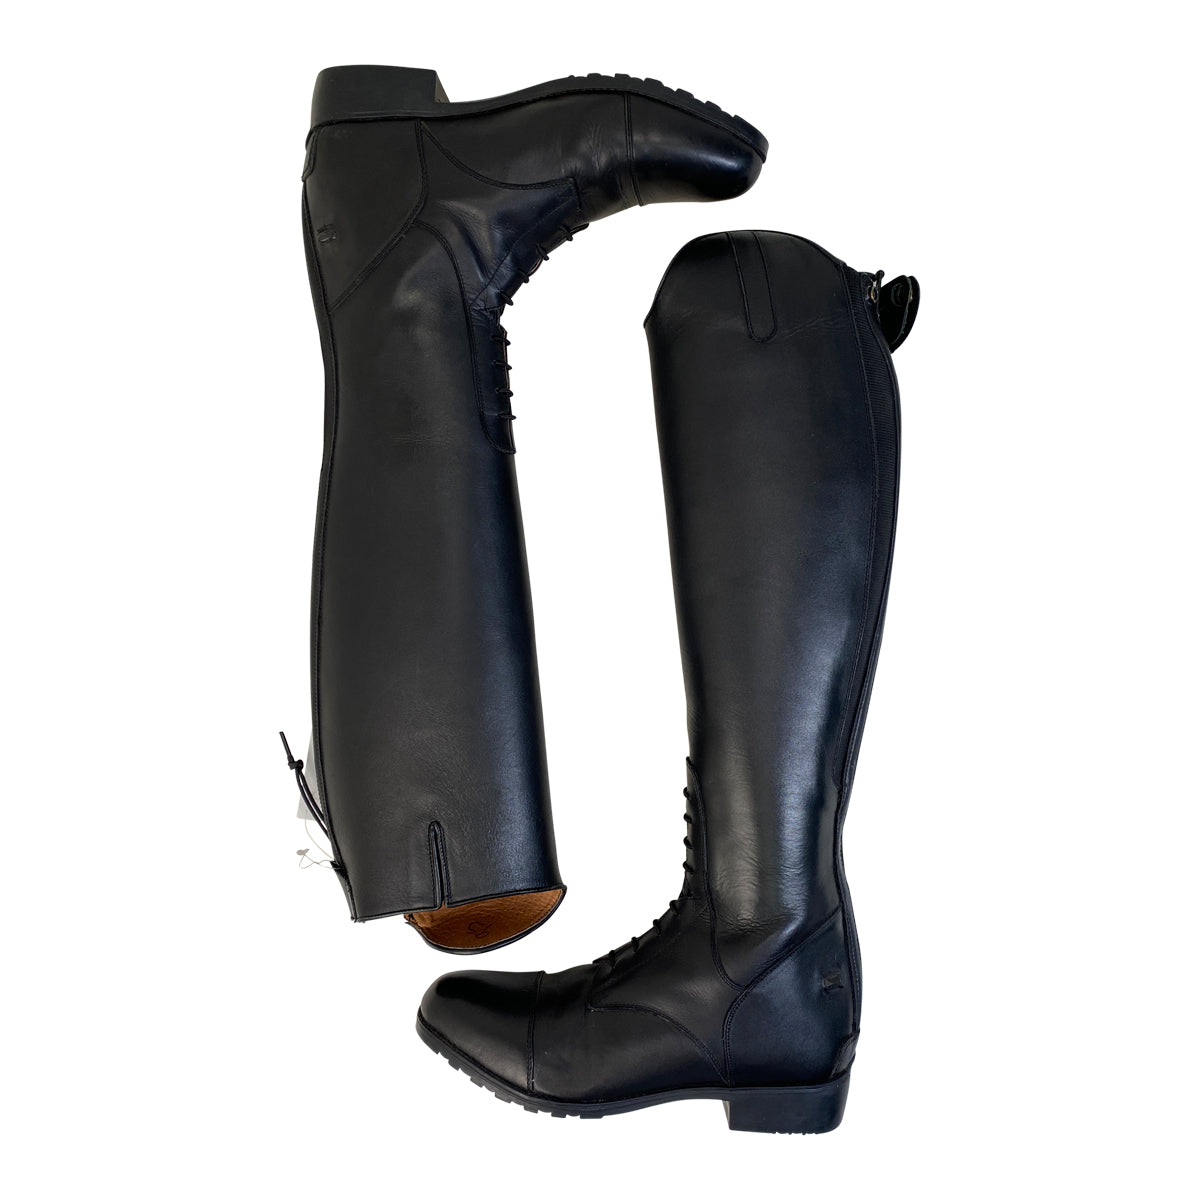 Mountain Horse Tall Boots in Black